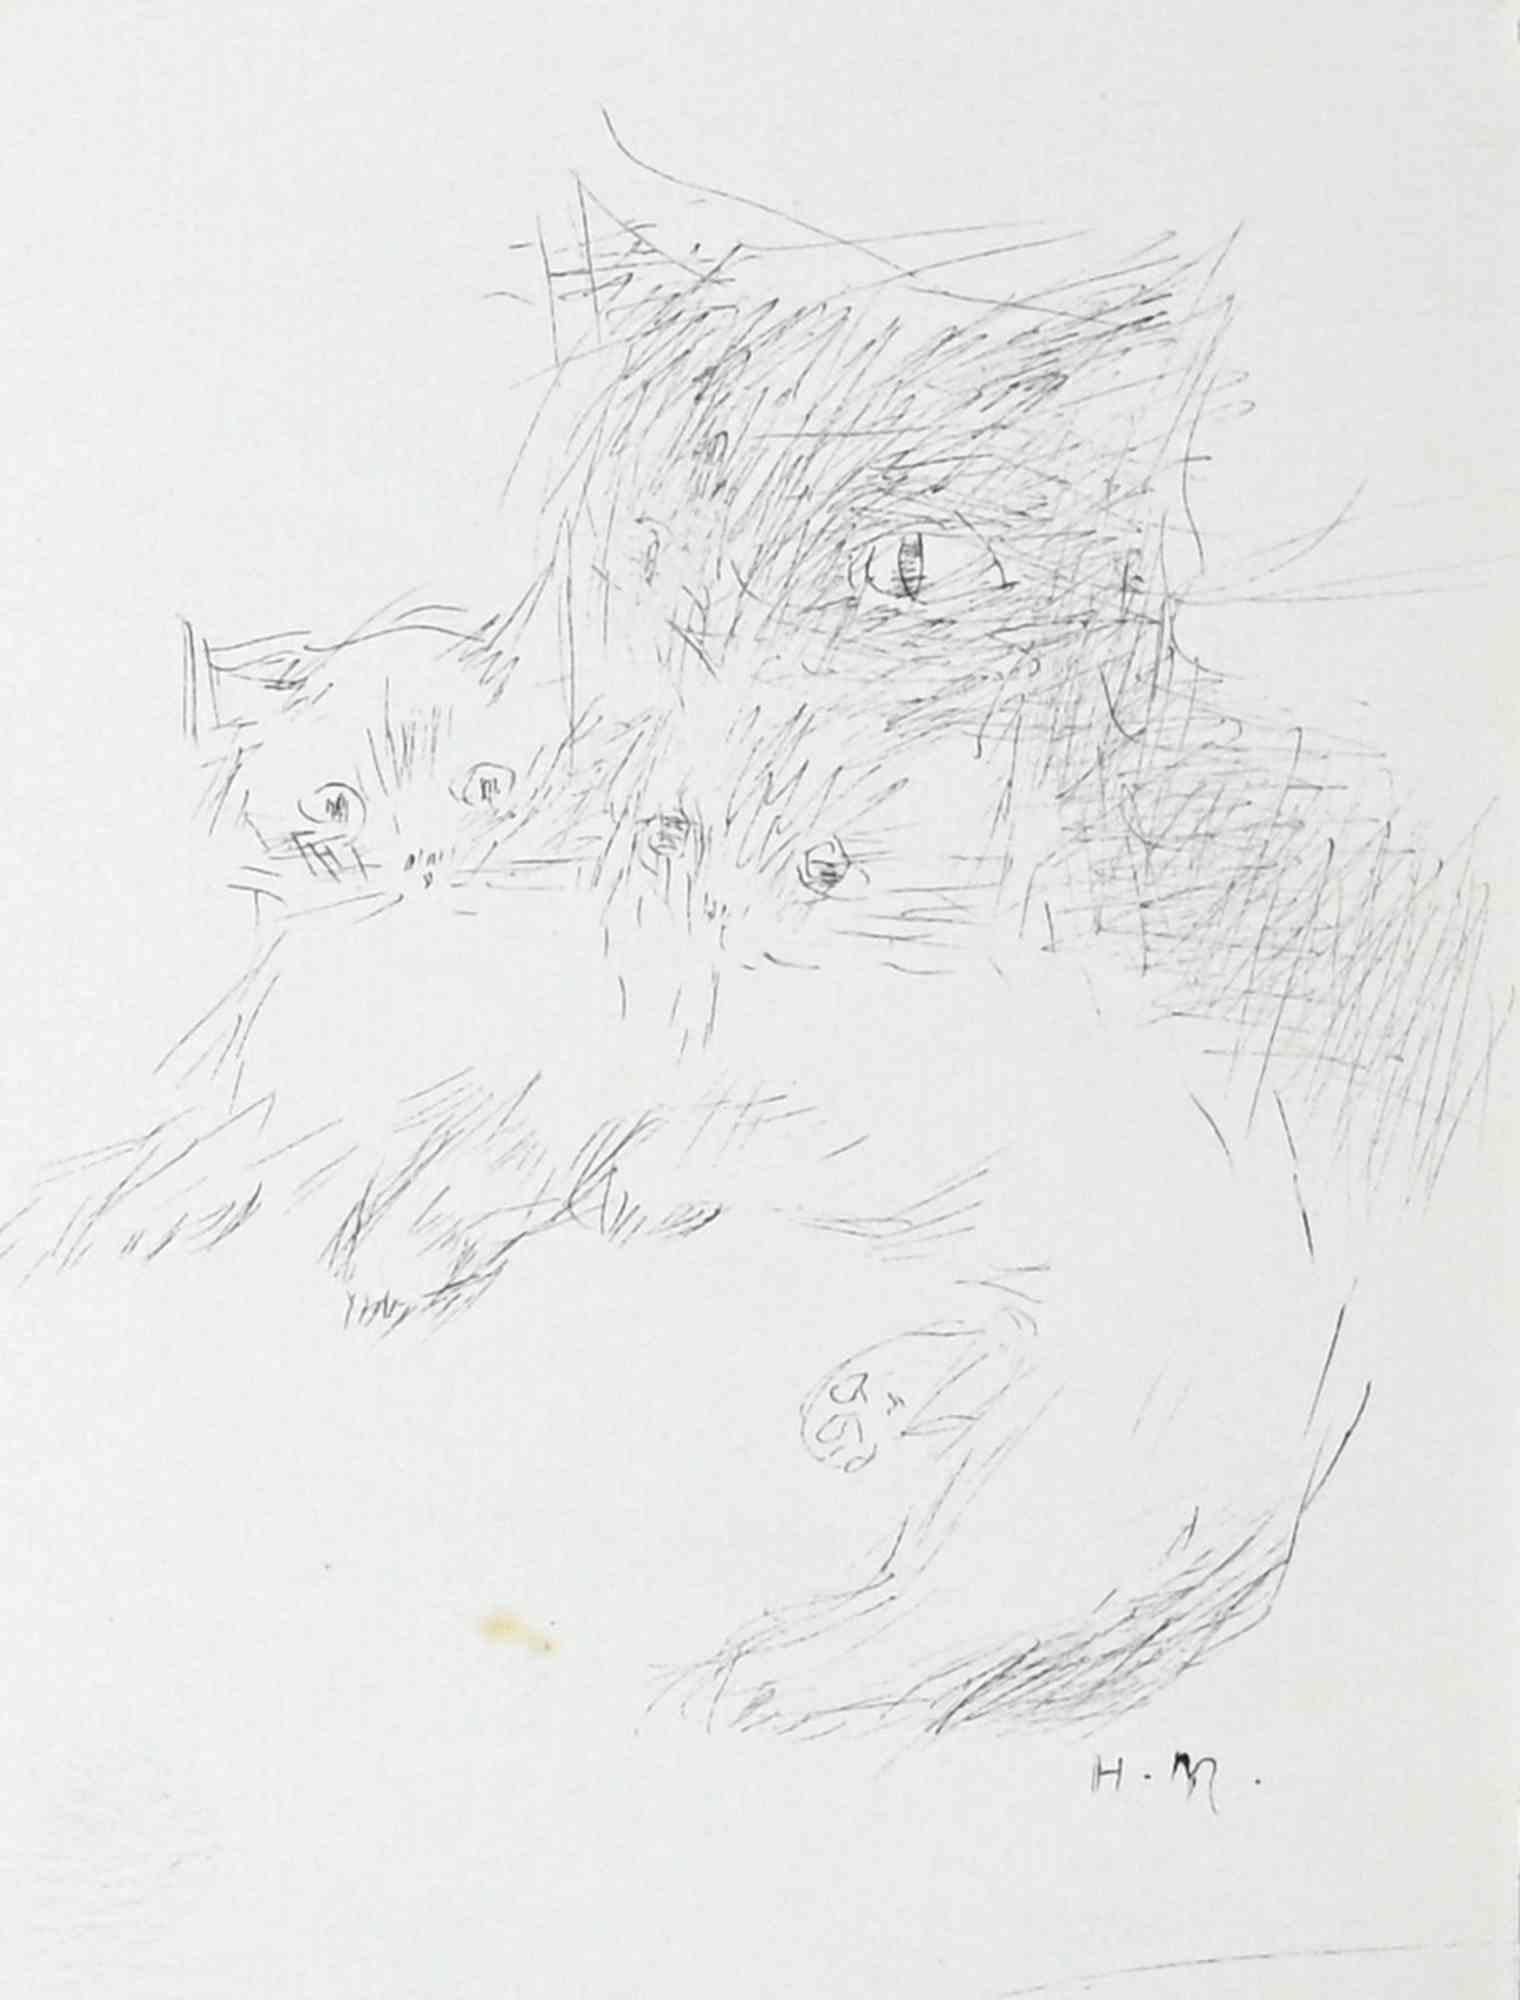 Portrait of Cats View is an original drawing in pen realized by Helène Neveur in the 1970s.

Good conditions.

The artwork is depicted through confident strokes in a well-balanced composition.